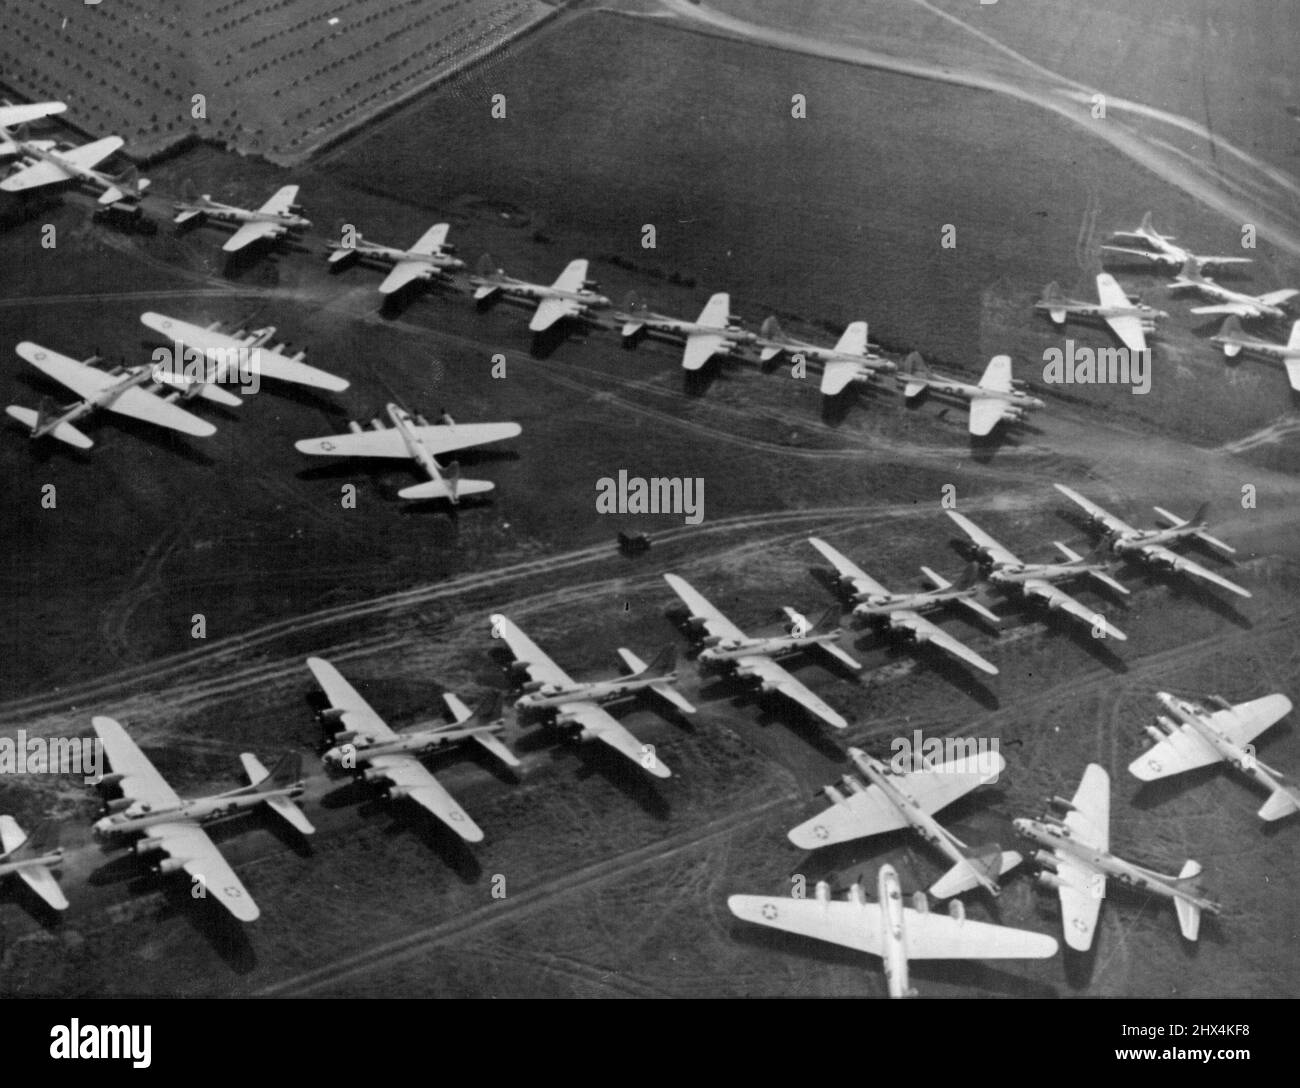 Flying Fortresses Ready For Bombing Of Germany -- Lined up and ready for combat these B-17 Flying Fortresses are only a small portion of the bombing might assembled in England by the U.S. Army Eight Air Force. Two years ago on Aug 17, 1942 an expeditionary force of 12 Flying Fortresses crossed the English Channel for the first time to drop bombs on enemy targets. Up to Aug. 24, 1944, Fortresses and Liberators of the Eight Air Force had flown 162,000 sorties to release about 300,000 tons of explosives on the enemy throughout Germany and German-invaded countries of Europe. September 15, 1944. (P Stock Photo